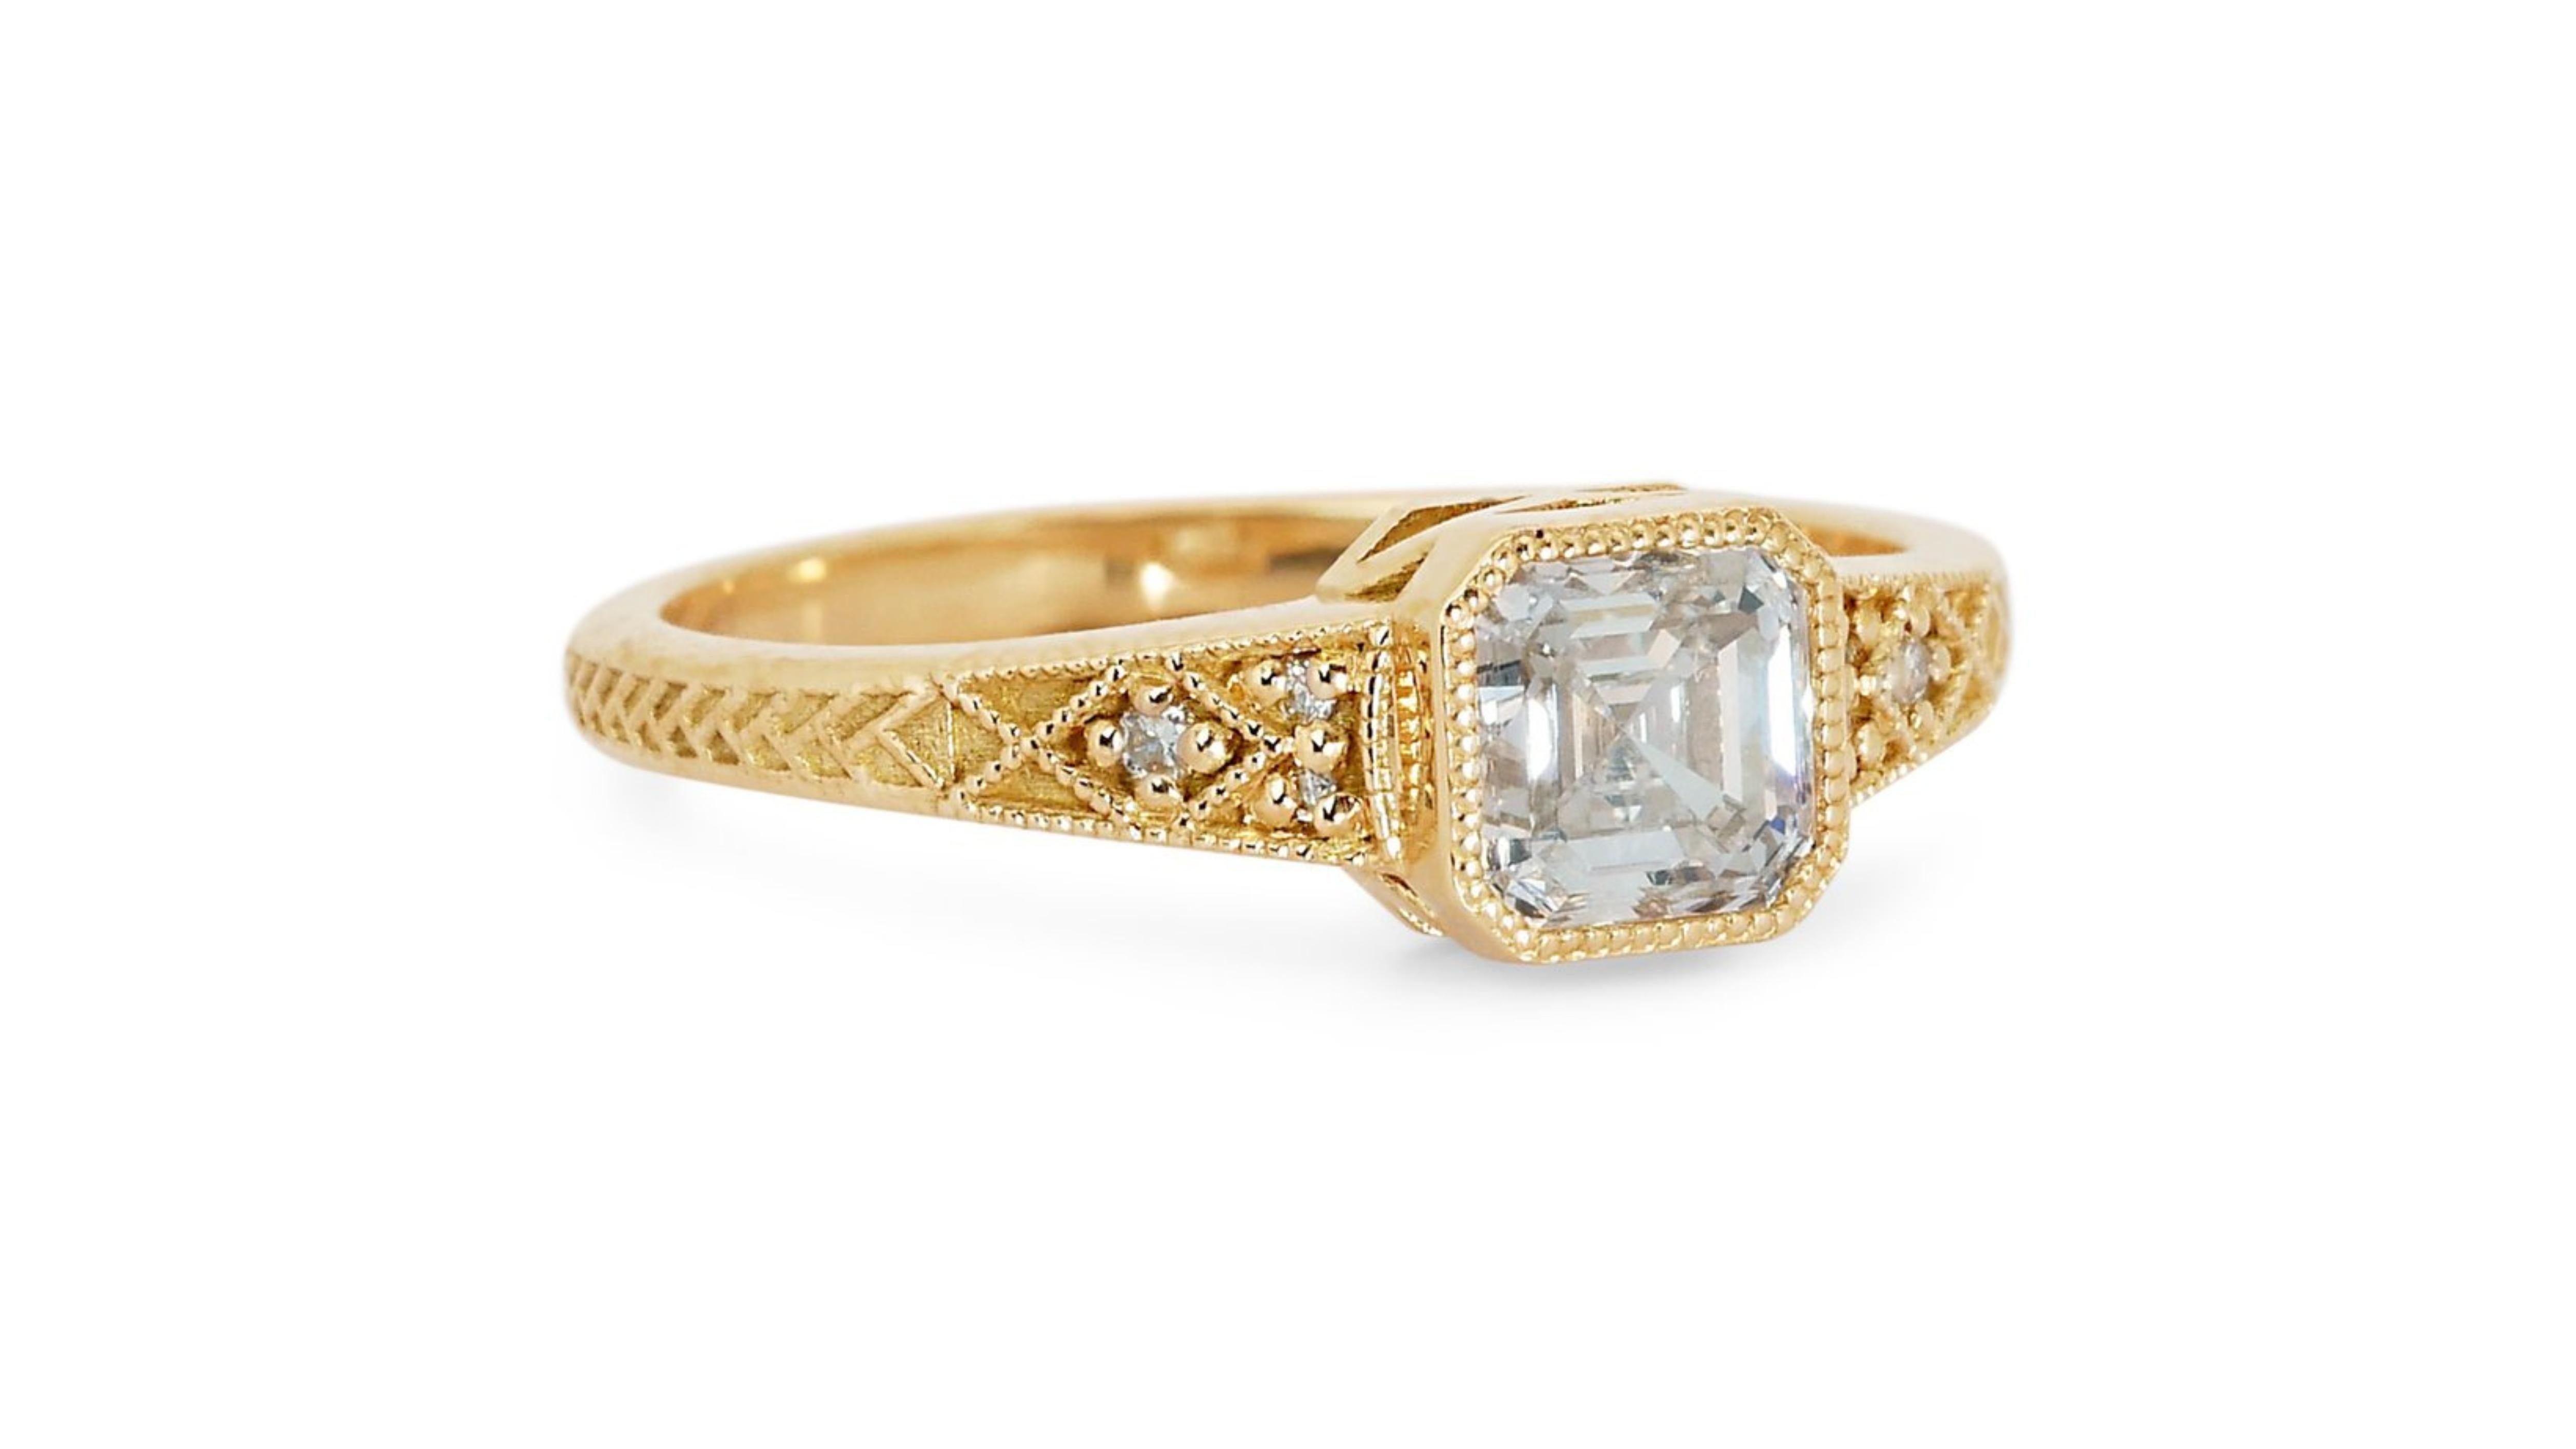 Magnificent 18k Yellow Gold Antique Style Ring w/ 0.83 ct Natural Diamonds IGI C For Sale 2